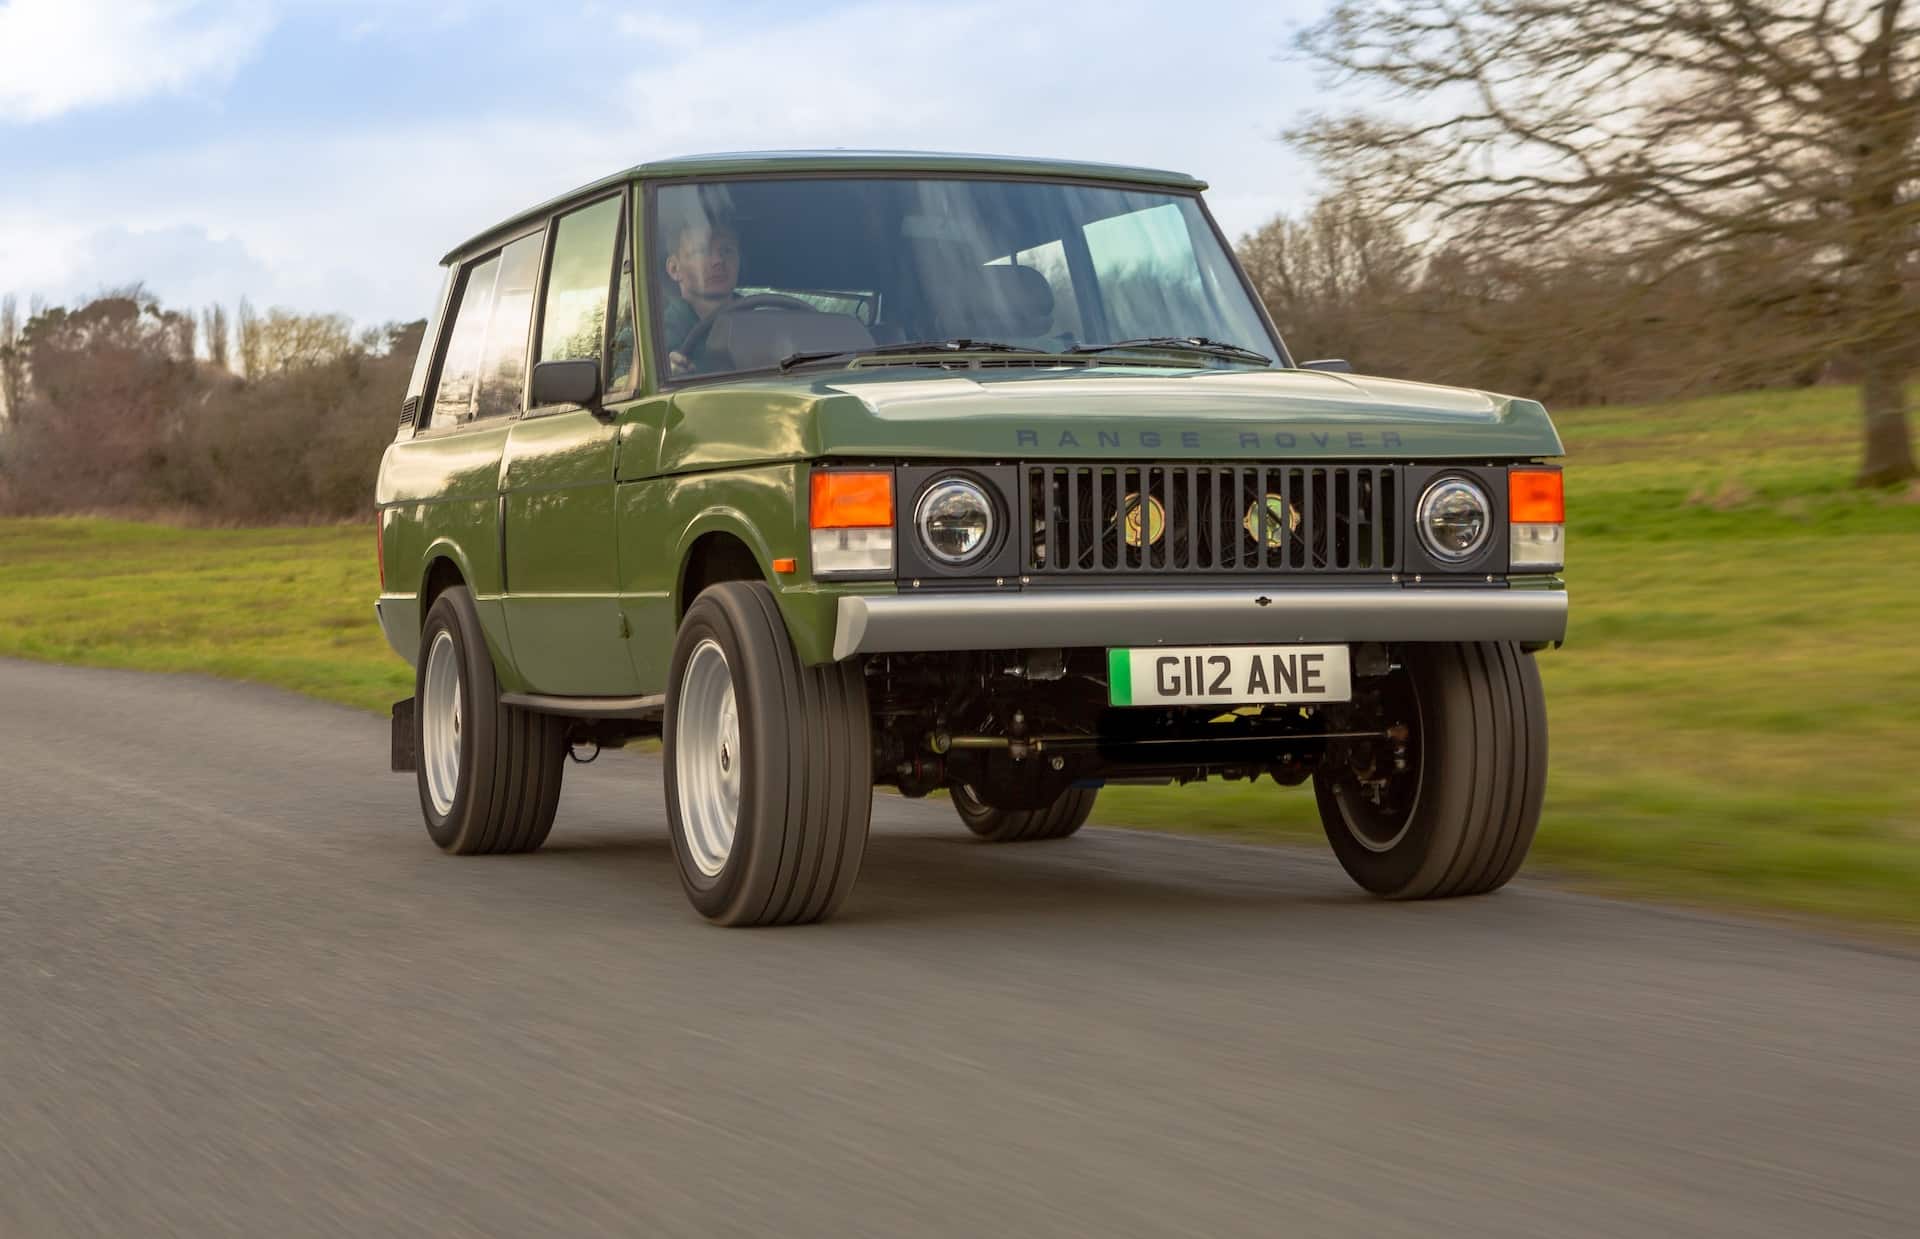 Inverted Debuts UK’s First Road-Registered Electrified Range Rover Classic